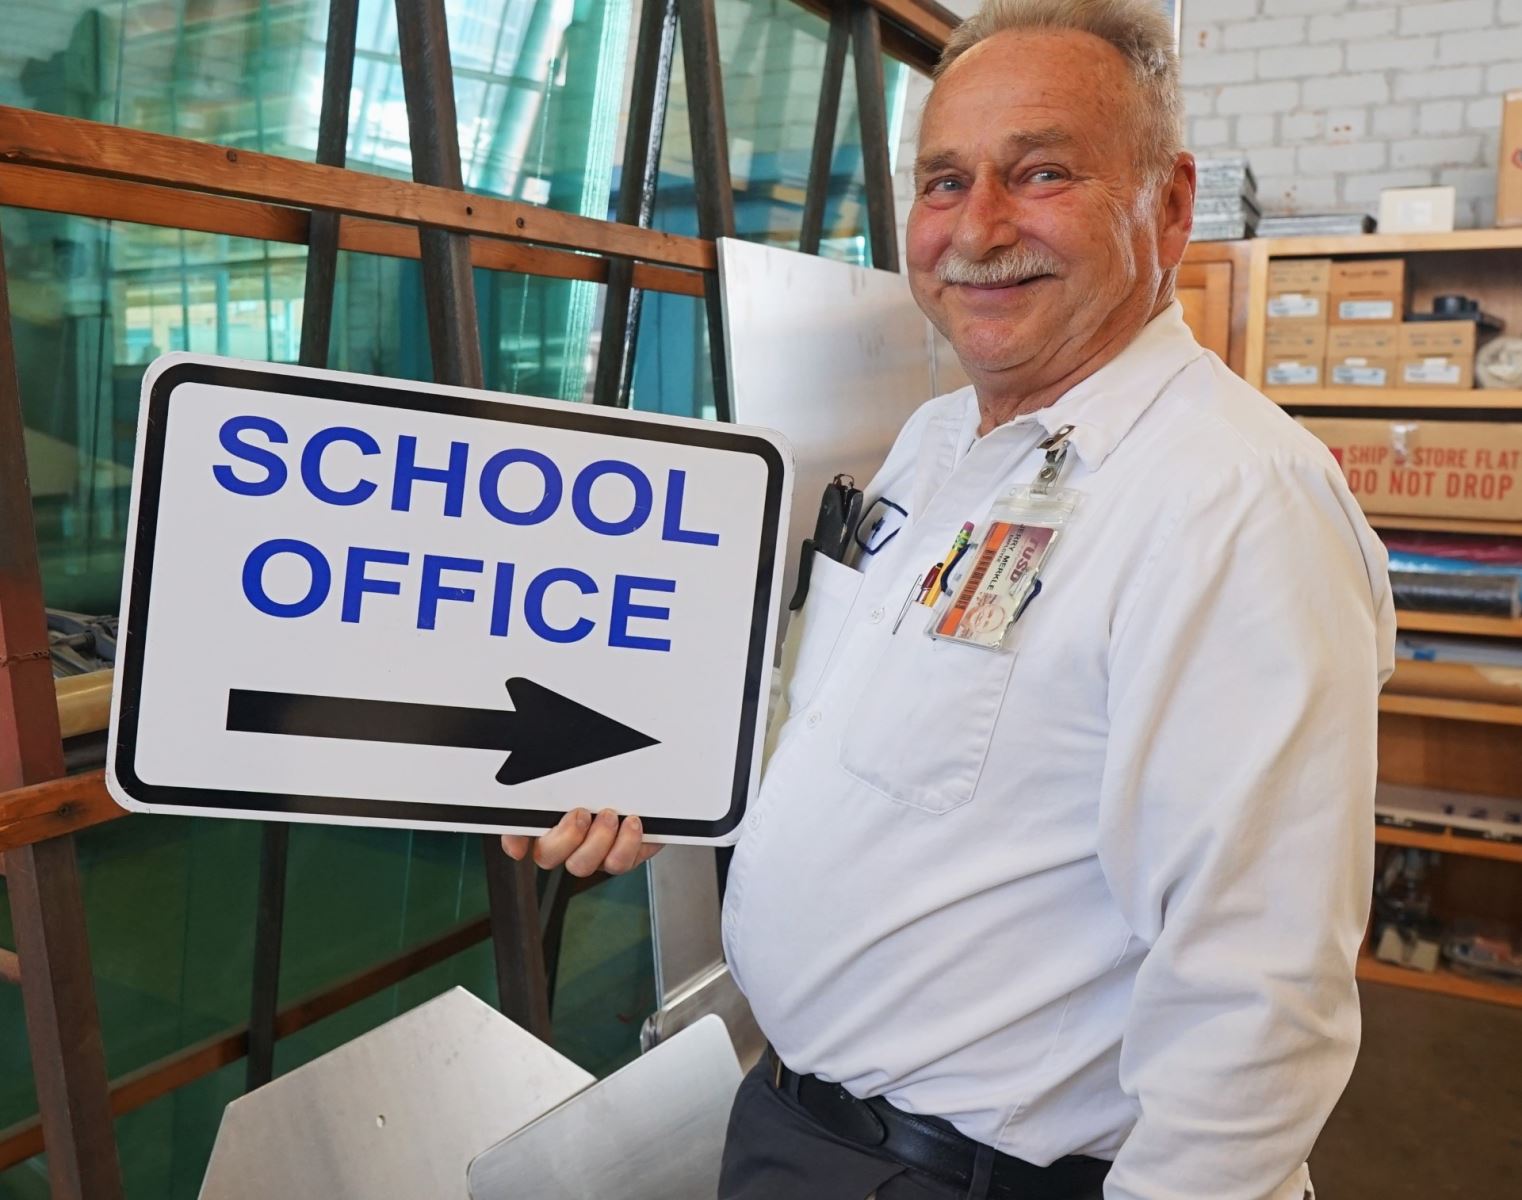 Jerry Merkle smiles with his sign reading School Office